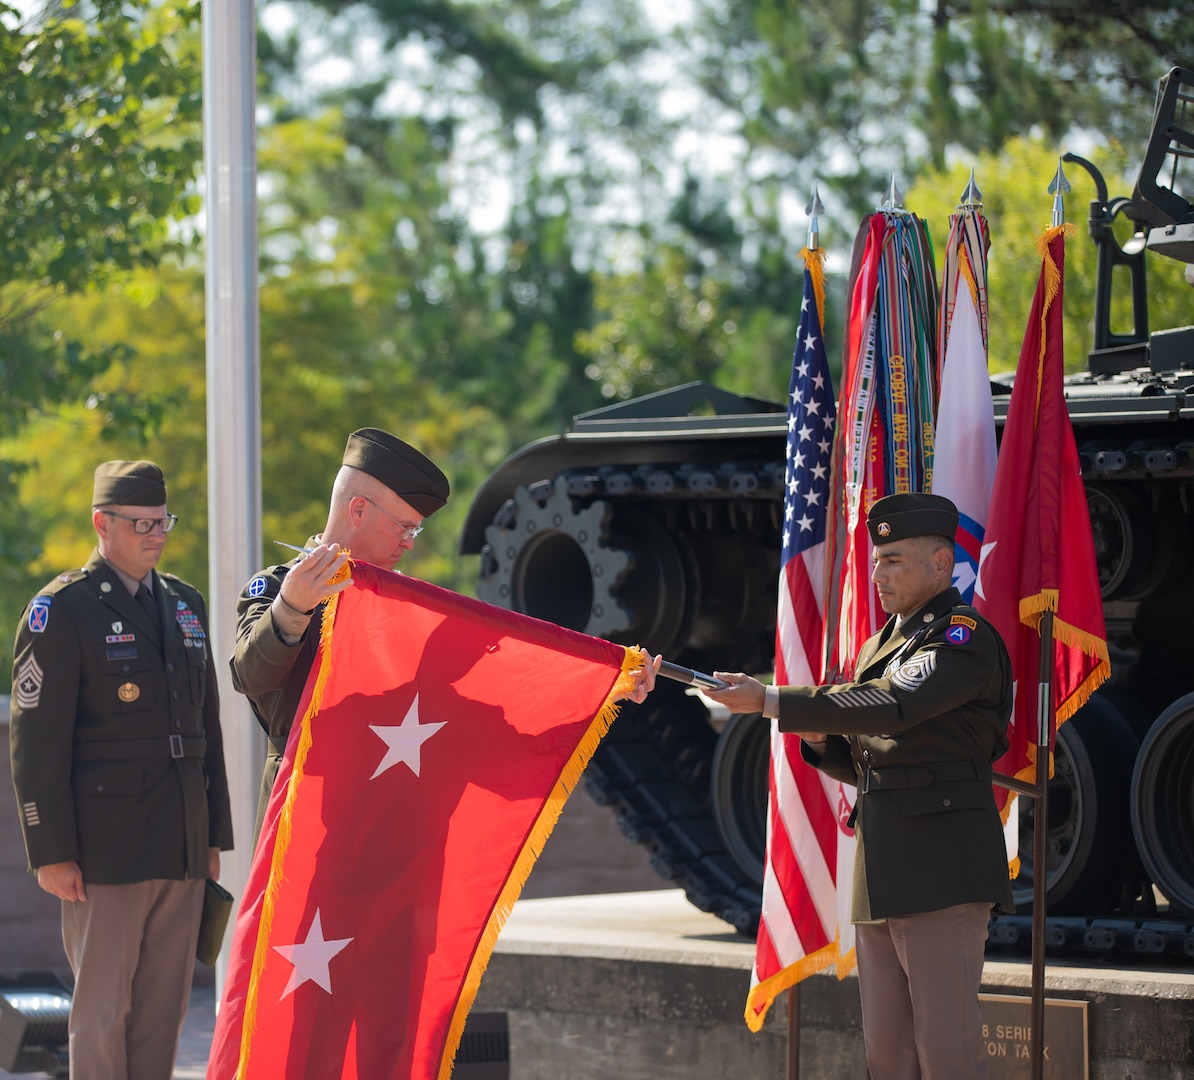 Maj. Gen. Henry S. Dixon, U.S. Army Central's Deputy Commanding General, is presented his ‘two-star’ general officer flag during his promotion ceremony at Shaw Air Force Base, S.C., July 07, 2023. Dixon was promoted to the rank of major general during the ceremony.